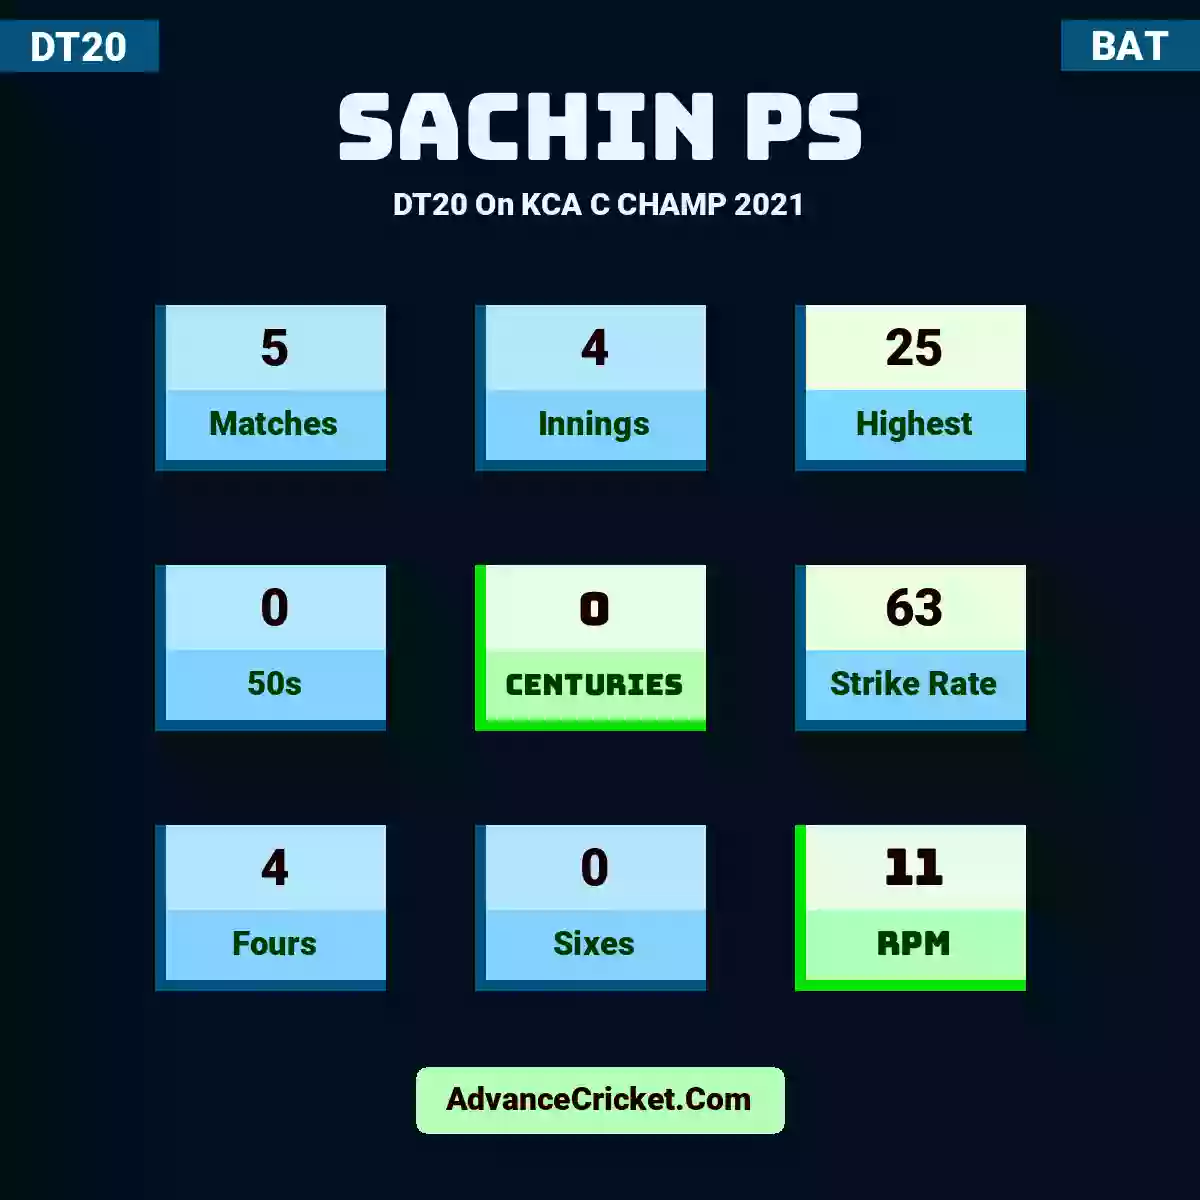 Sachin PS DT20  On KCA C CHAMP 2021, Sachin PS played 5 matches, scored 25 runs as highest, 0 half-centuries, and 0 centuries, with a strike rate of 63. S.PS hit 4 fours and 0 sixes, with an RPM of 11.